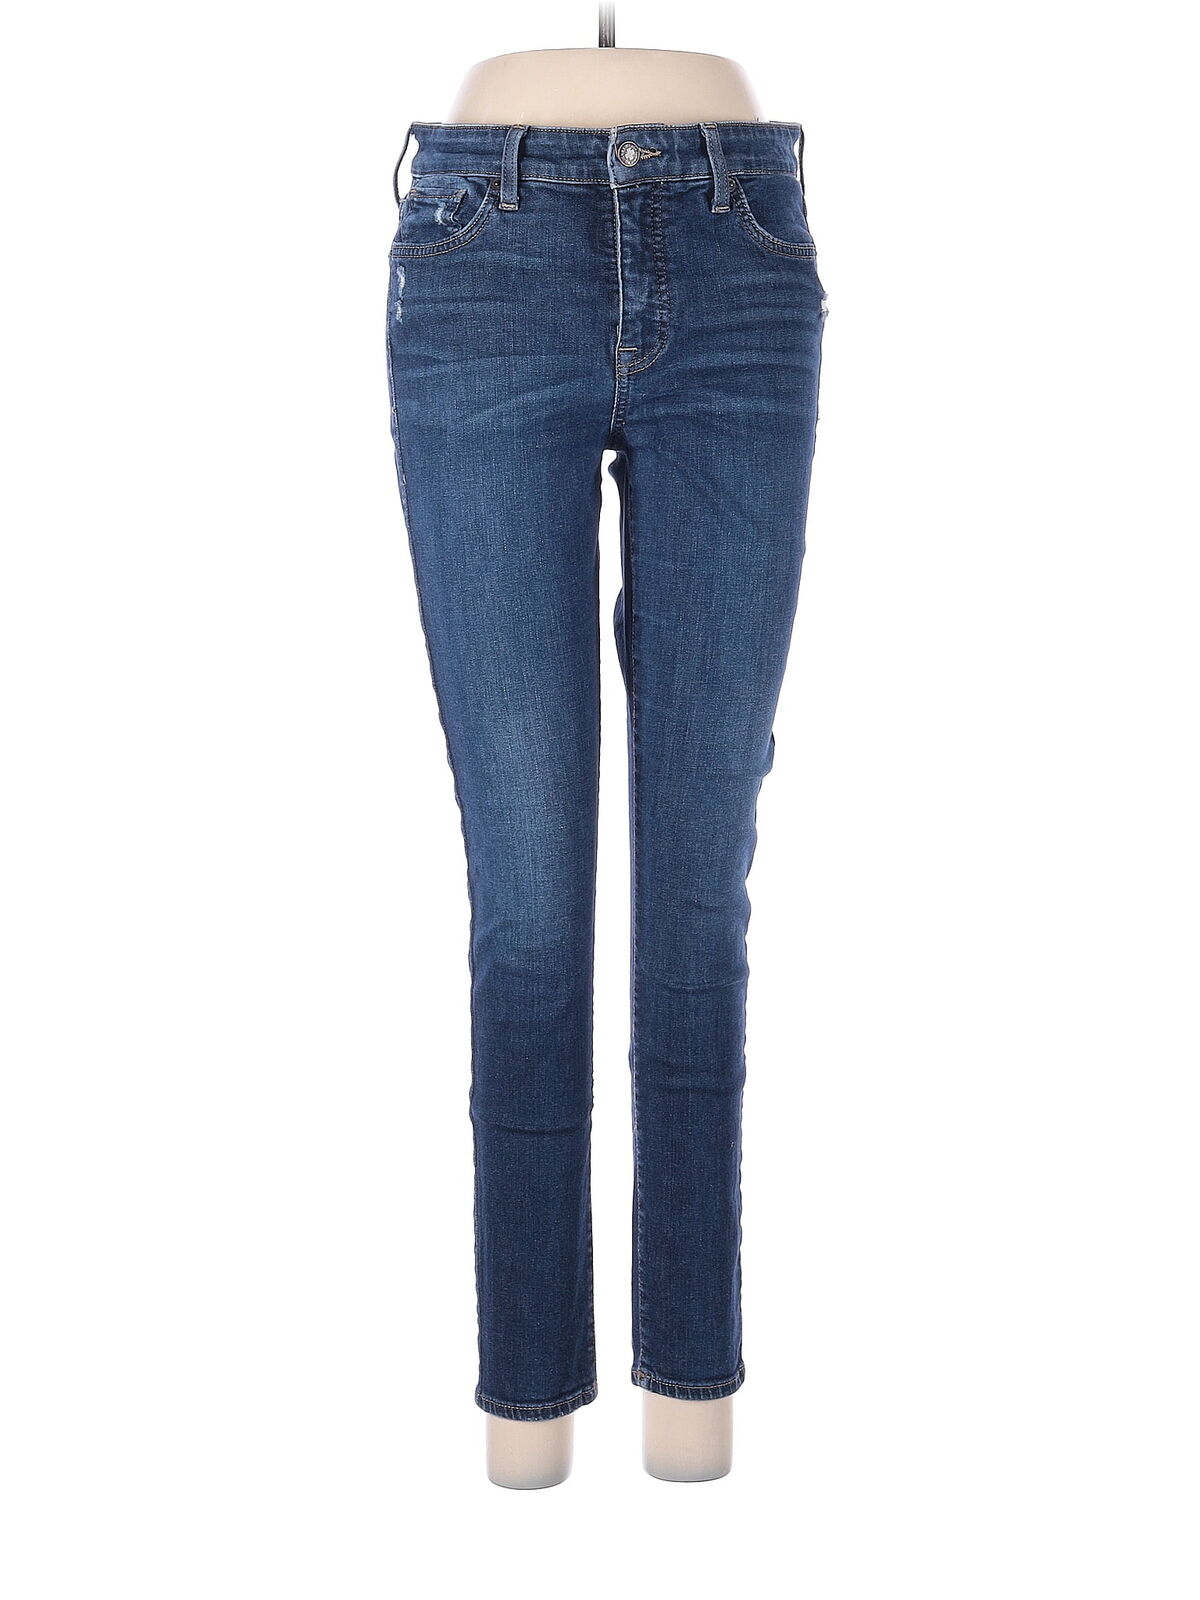 Lucky Brand Women Blue Jeans 8 - image 1